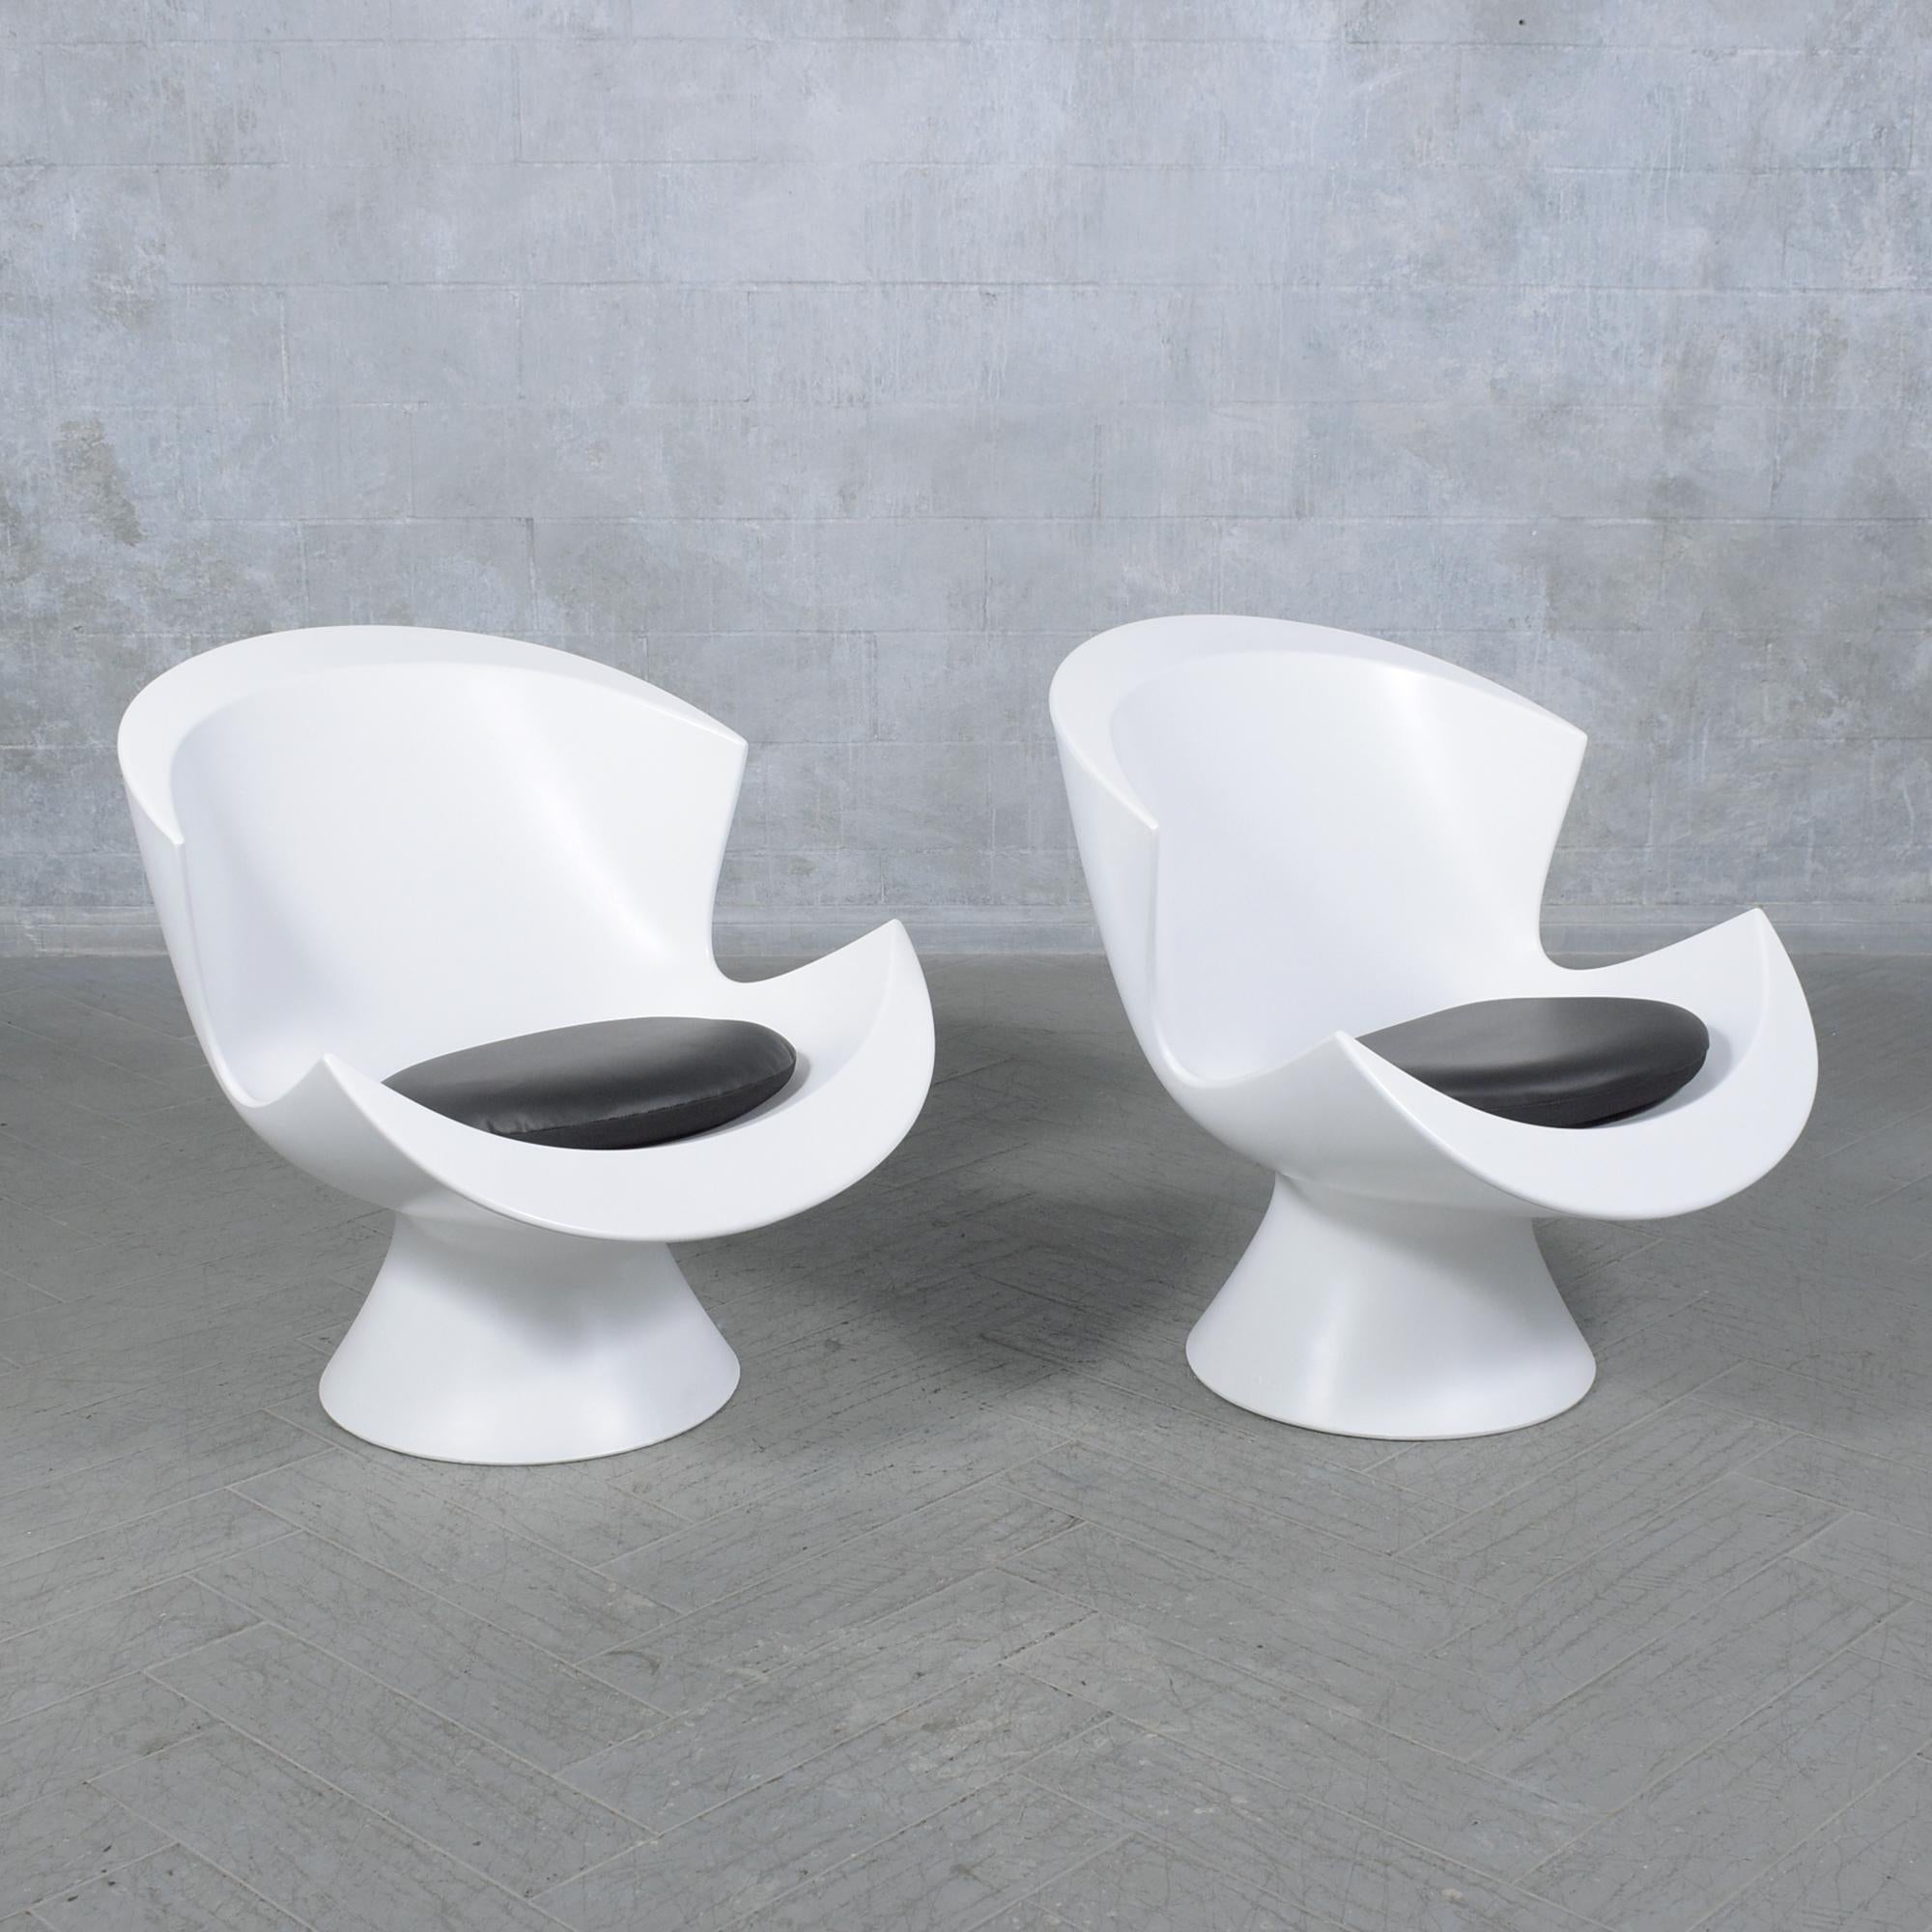 Leather Karim Rashid Post-Modern Lounge Chairs: A Symphony of Style & Comfort For Sale